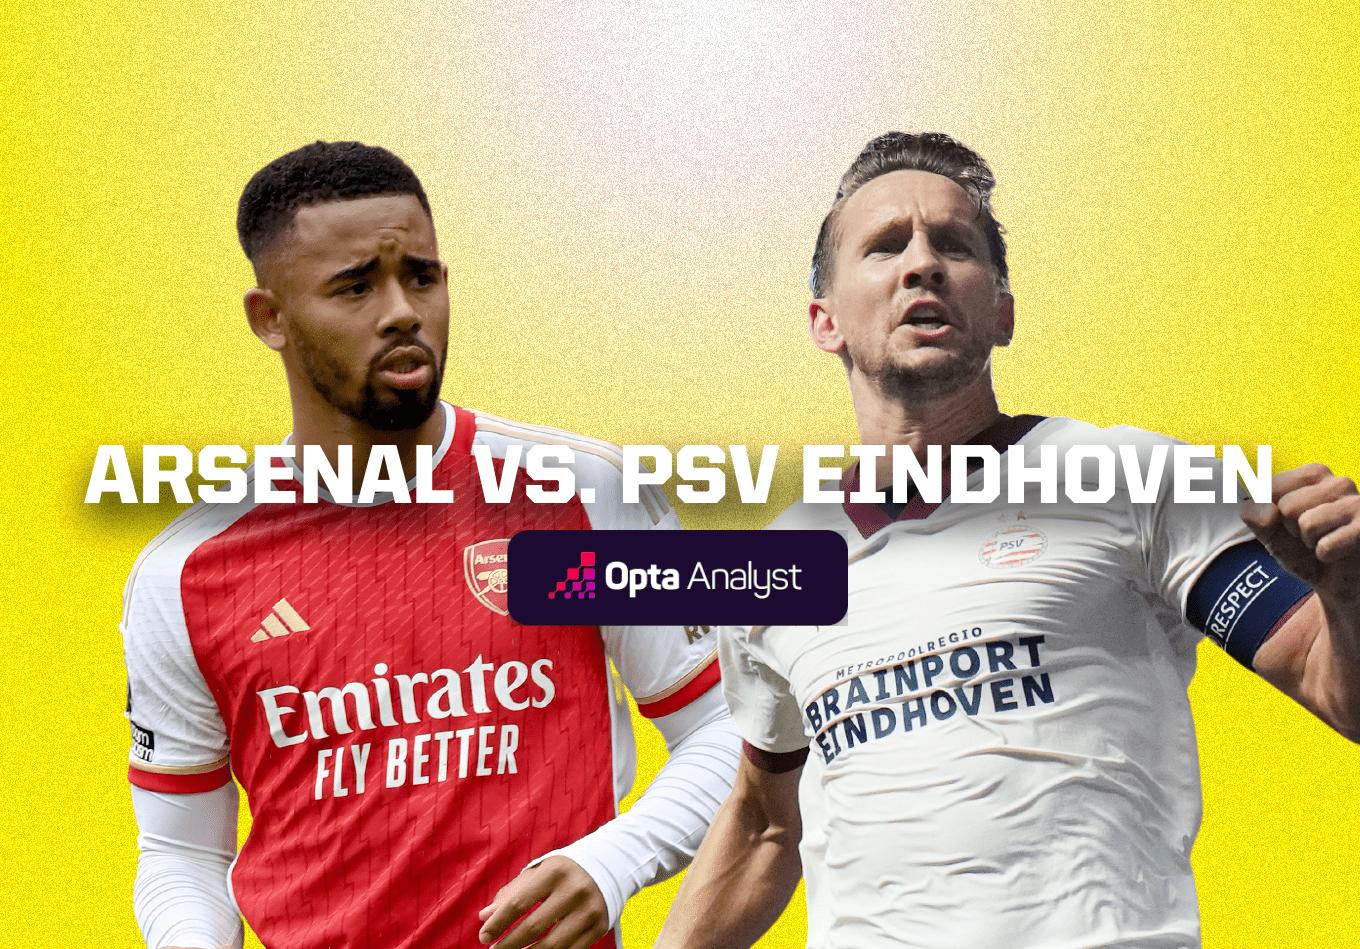 Arsenal vs PSV Eindhoven: Prediction and Preview